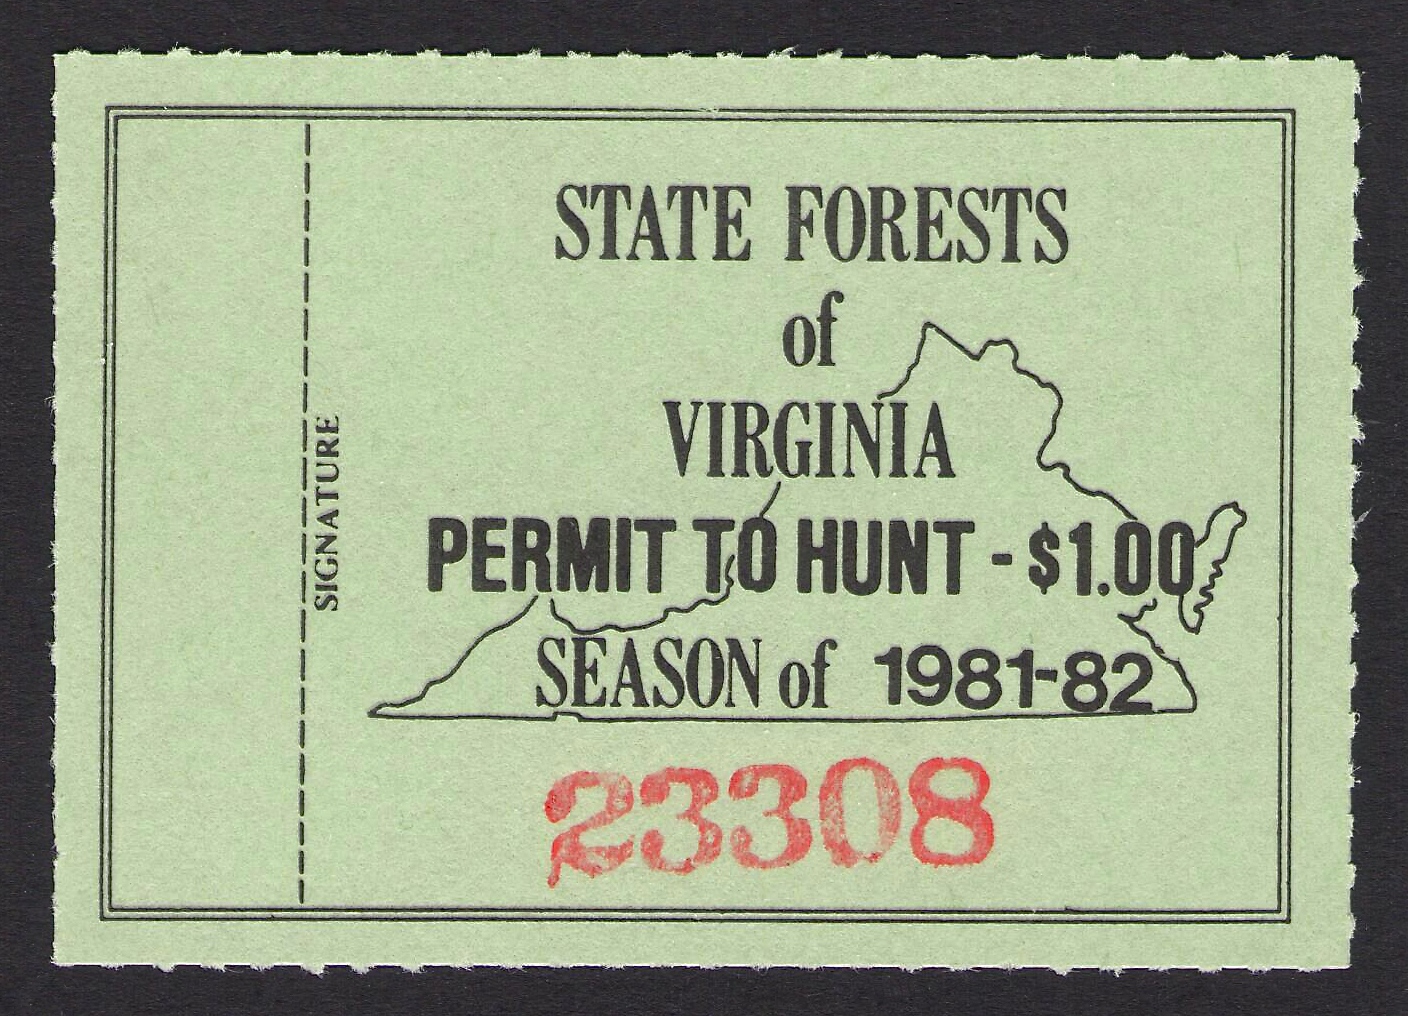 1981-82 Virginia State Forest